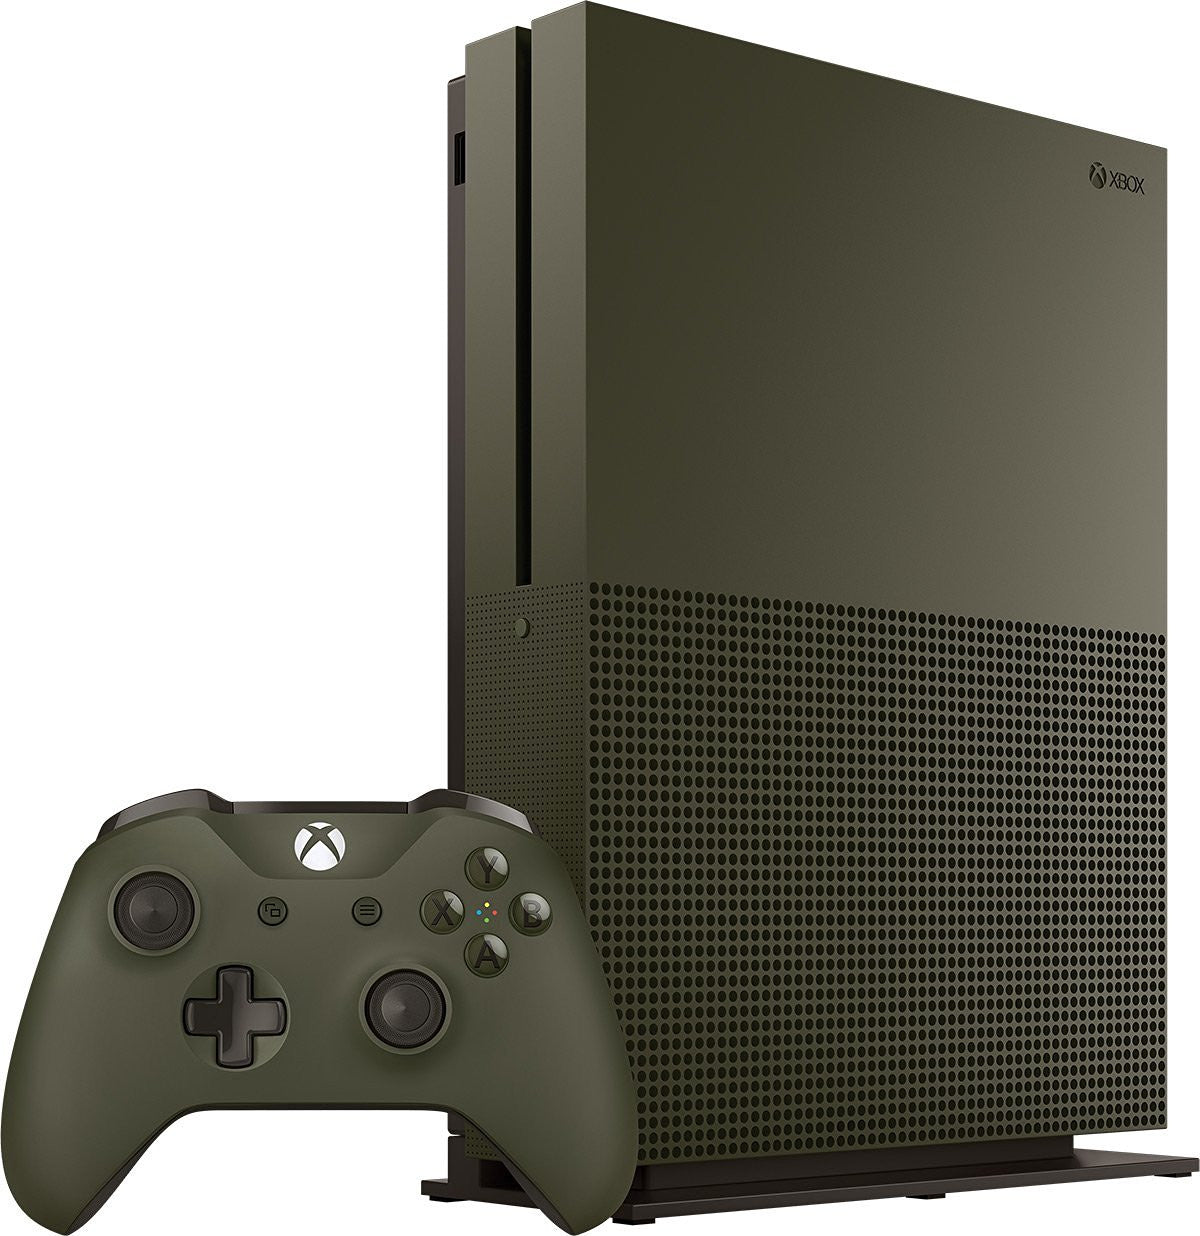 Xbox One S 1TB Console - Battlefield 1 Special Edition Bundle - Preorder